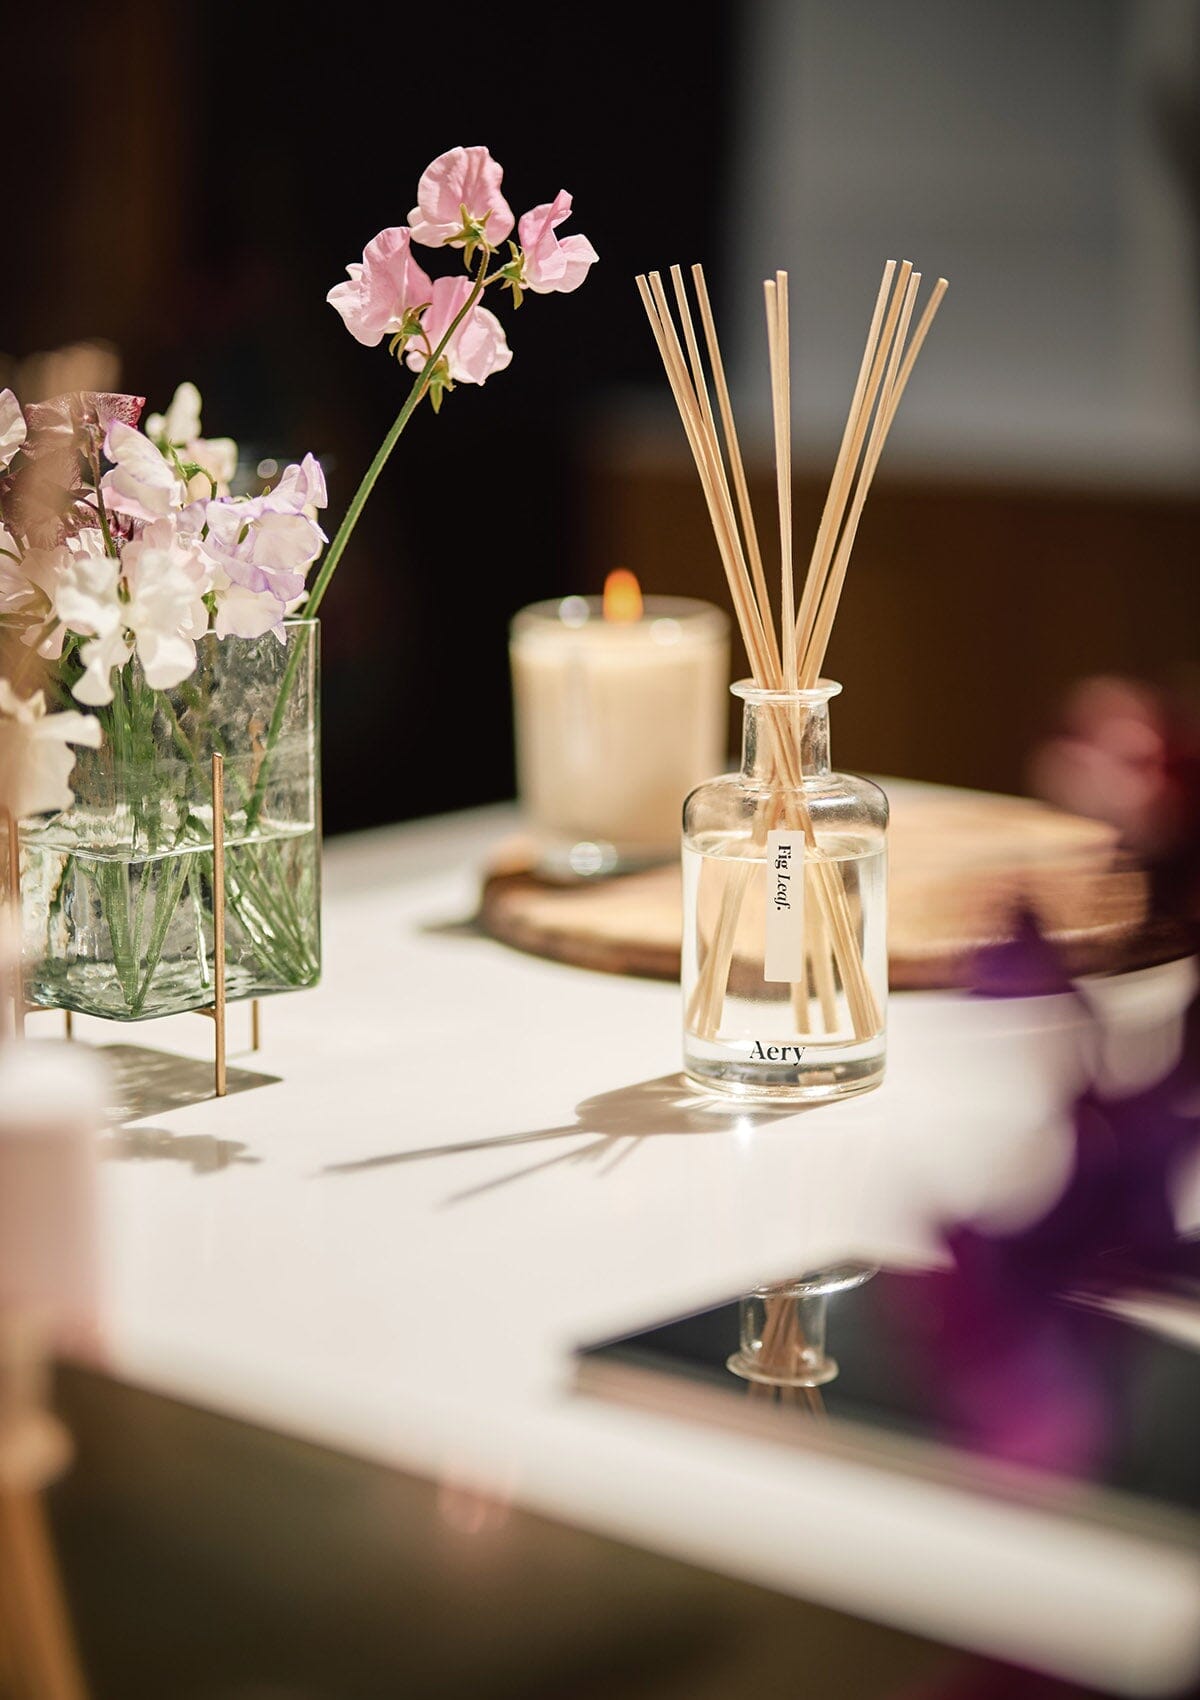 Cream Fig Leaf reed diffuser by aery displayed next to vase of white flowers on kitchen worktop 